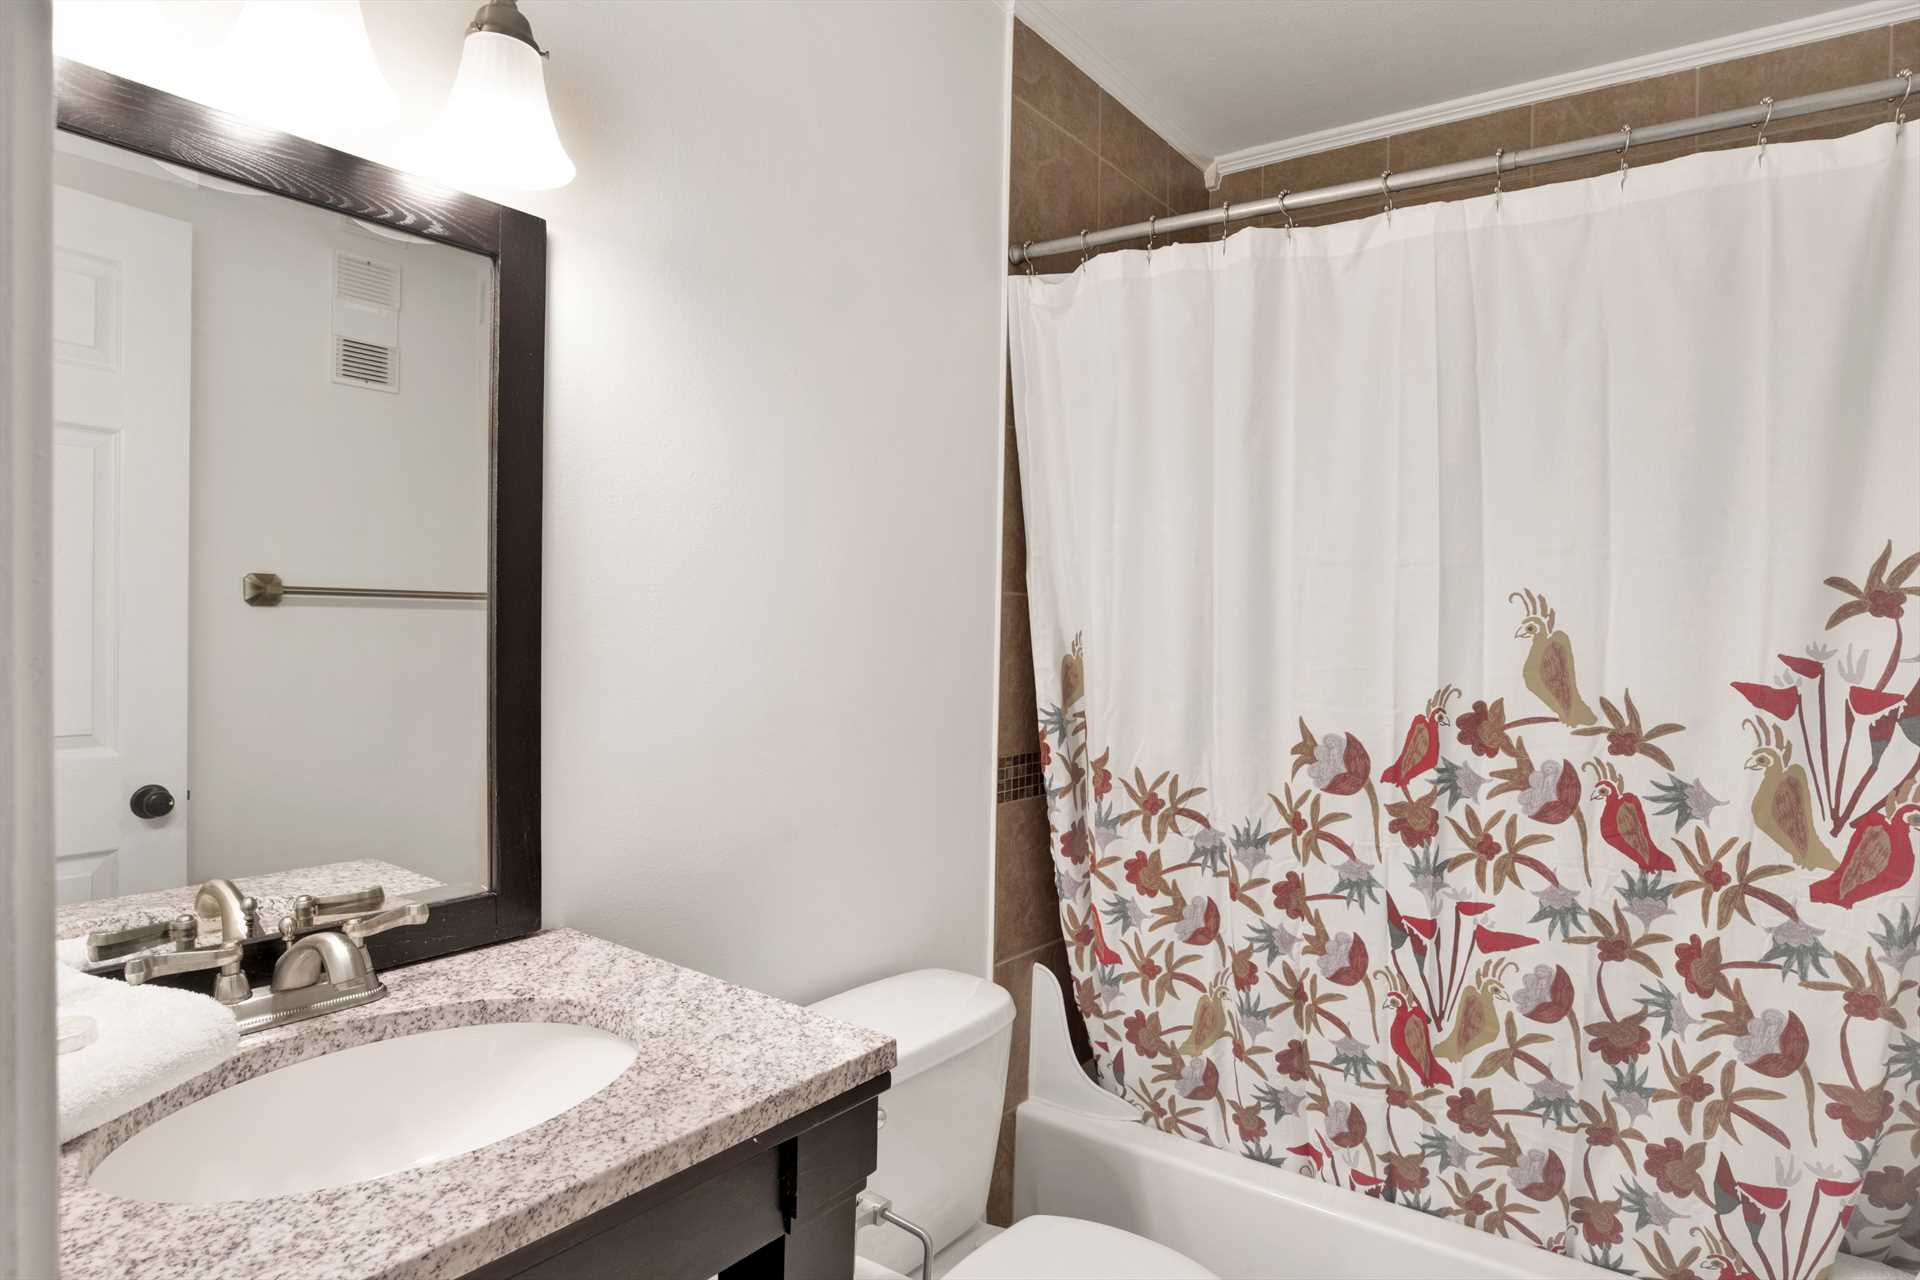 Renovated second bathroom is ready for your arrival with sta